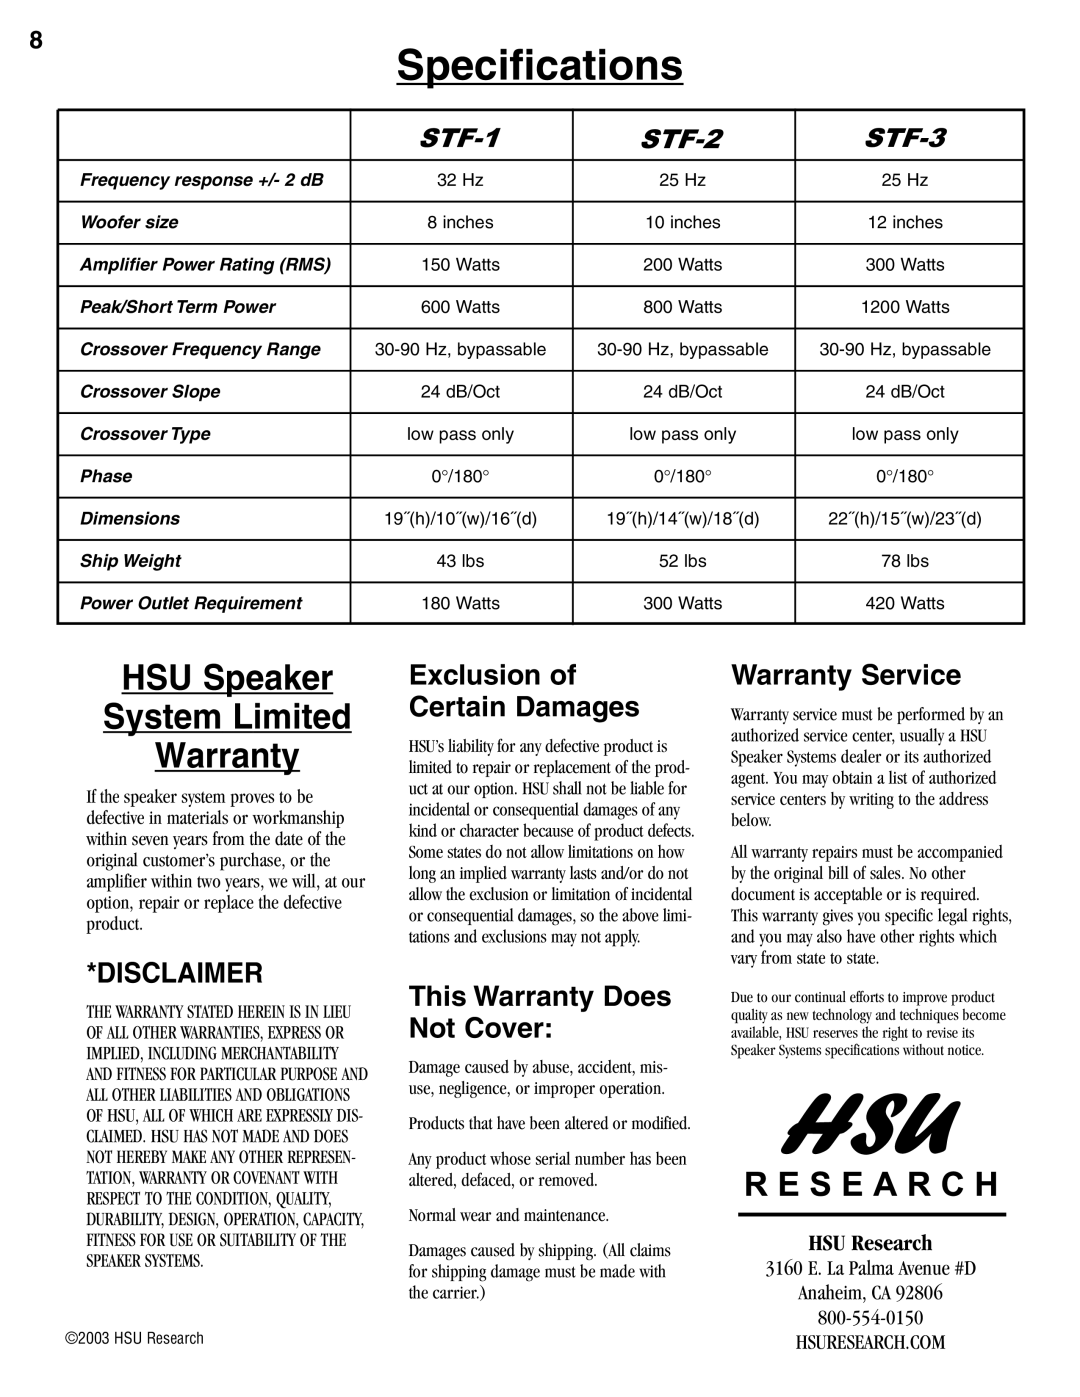 Hsu Research STF manual Specifications, HSU Speaker System Limited Warranty, Disclaimer, Exclusion of Certain Damages 